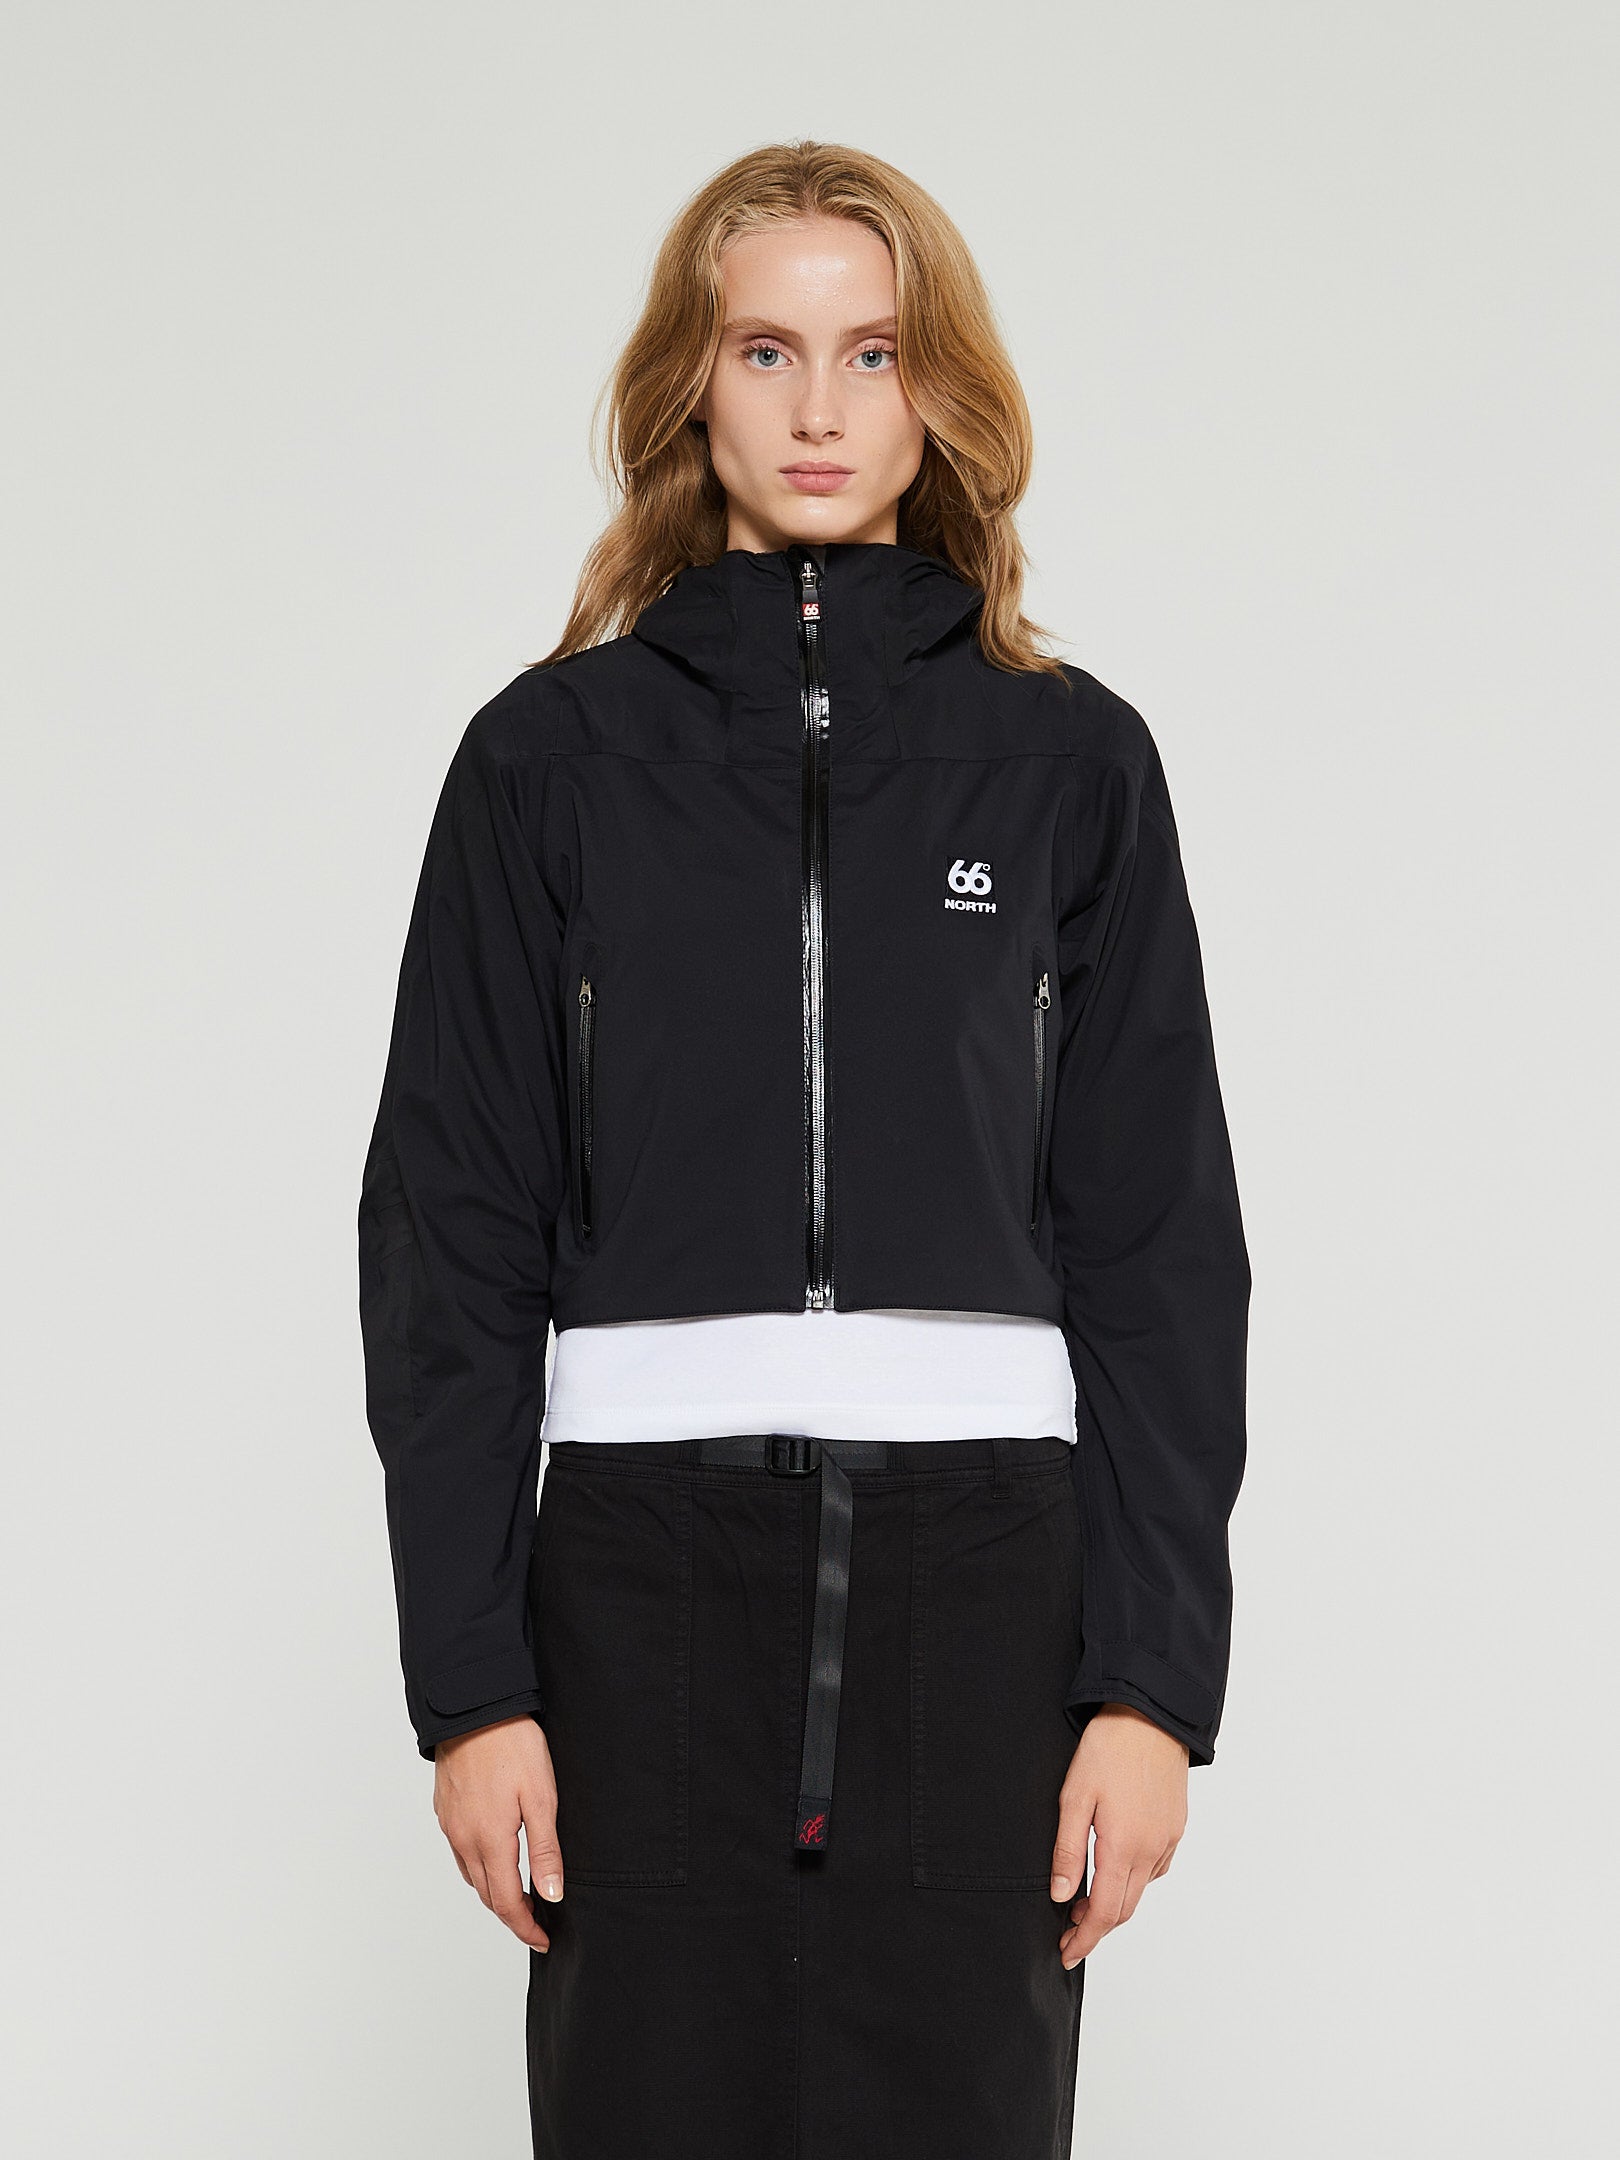 66 NORTH - Snaefell W Cropped Neoshell Jacket in Black